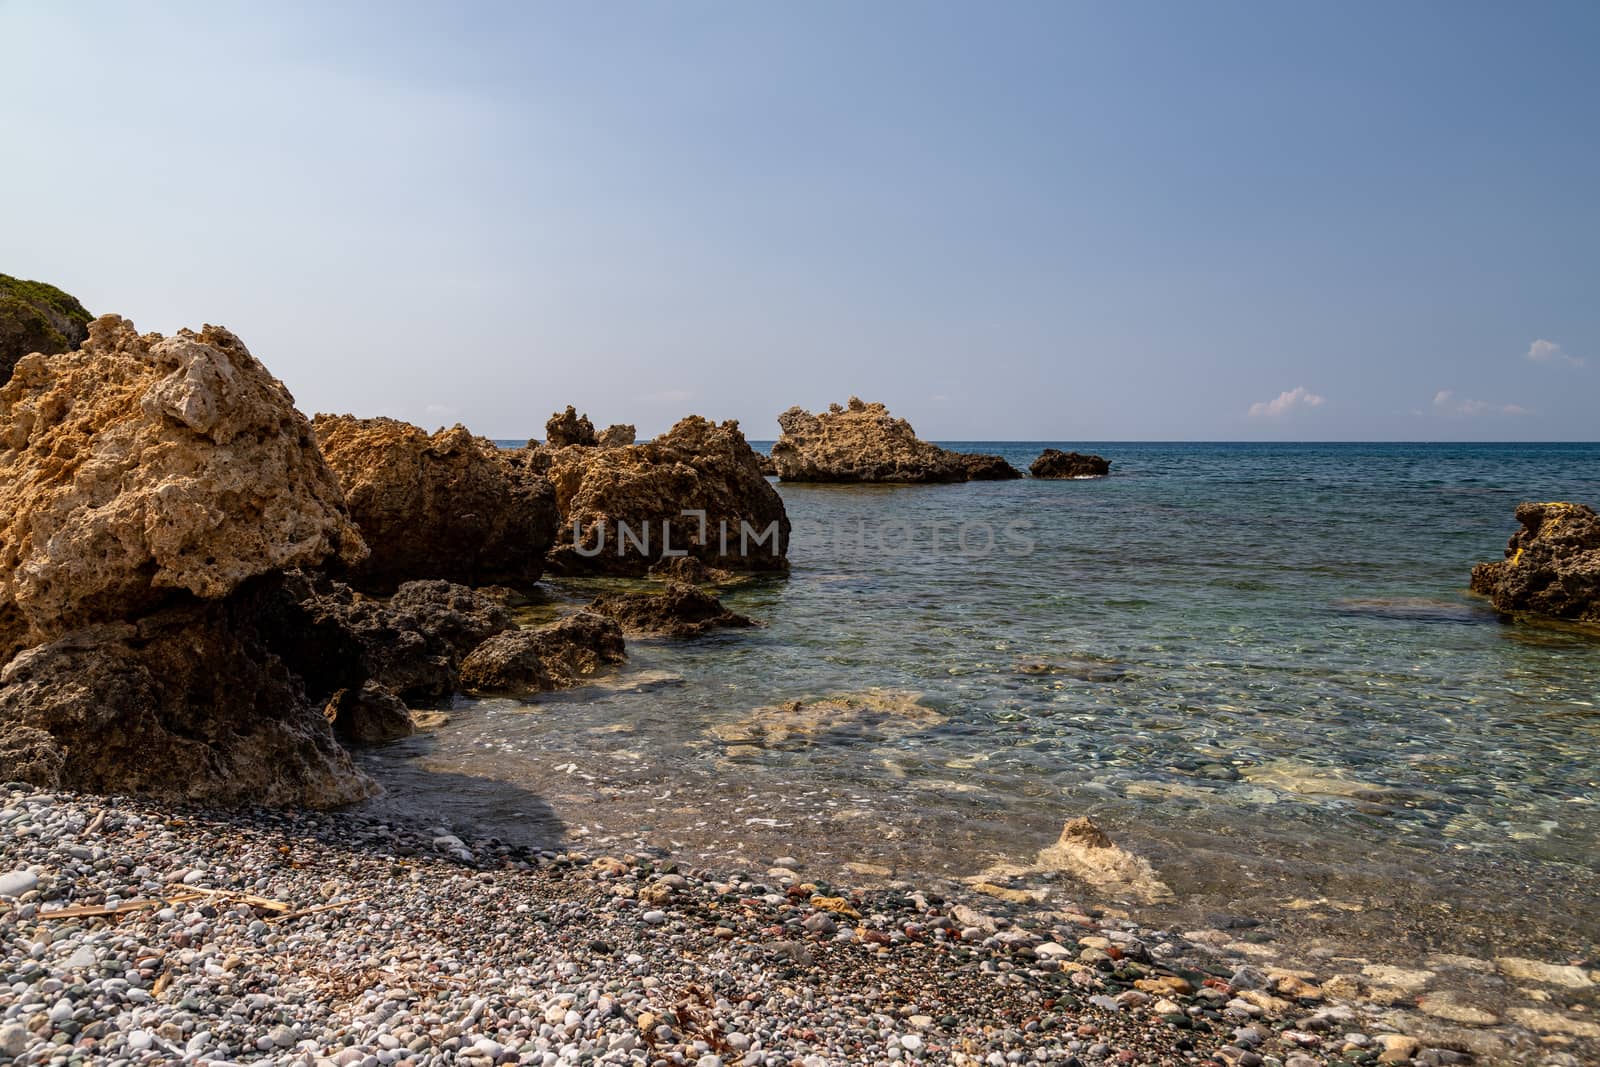 View at the rocky coastline of Plimmiri on  Rhodes island, Greece with gravel beach and rocks in the water